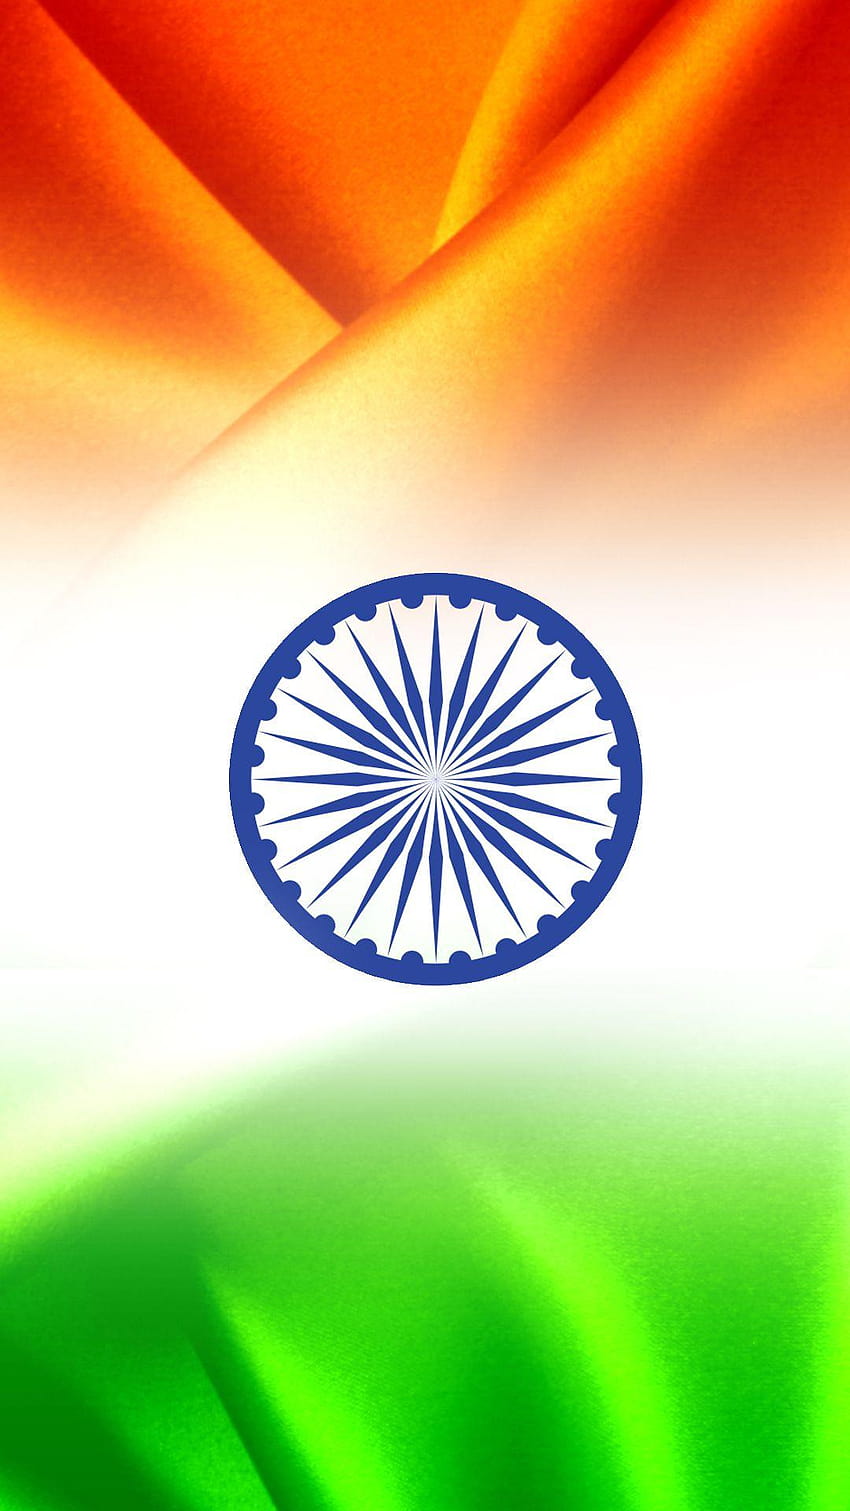 India Flag for Mobile Phone 11 of 17 – Tricolour India, flag of india HD phone wallpaper